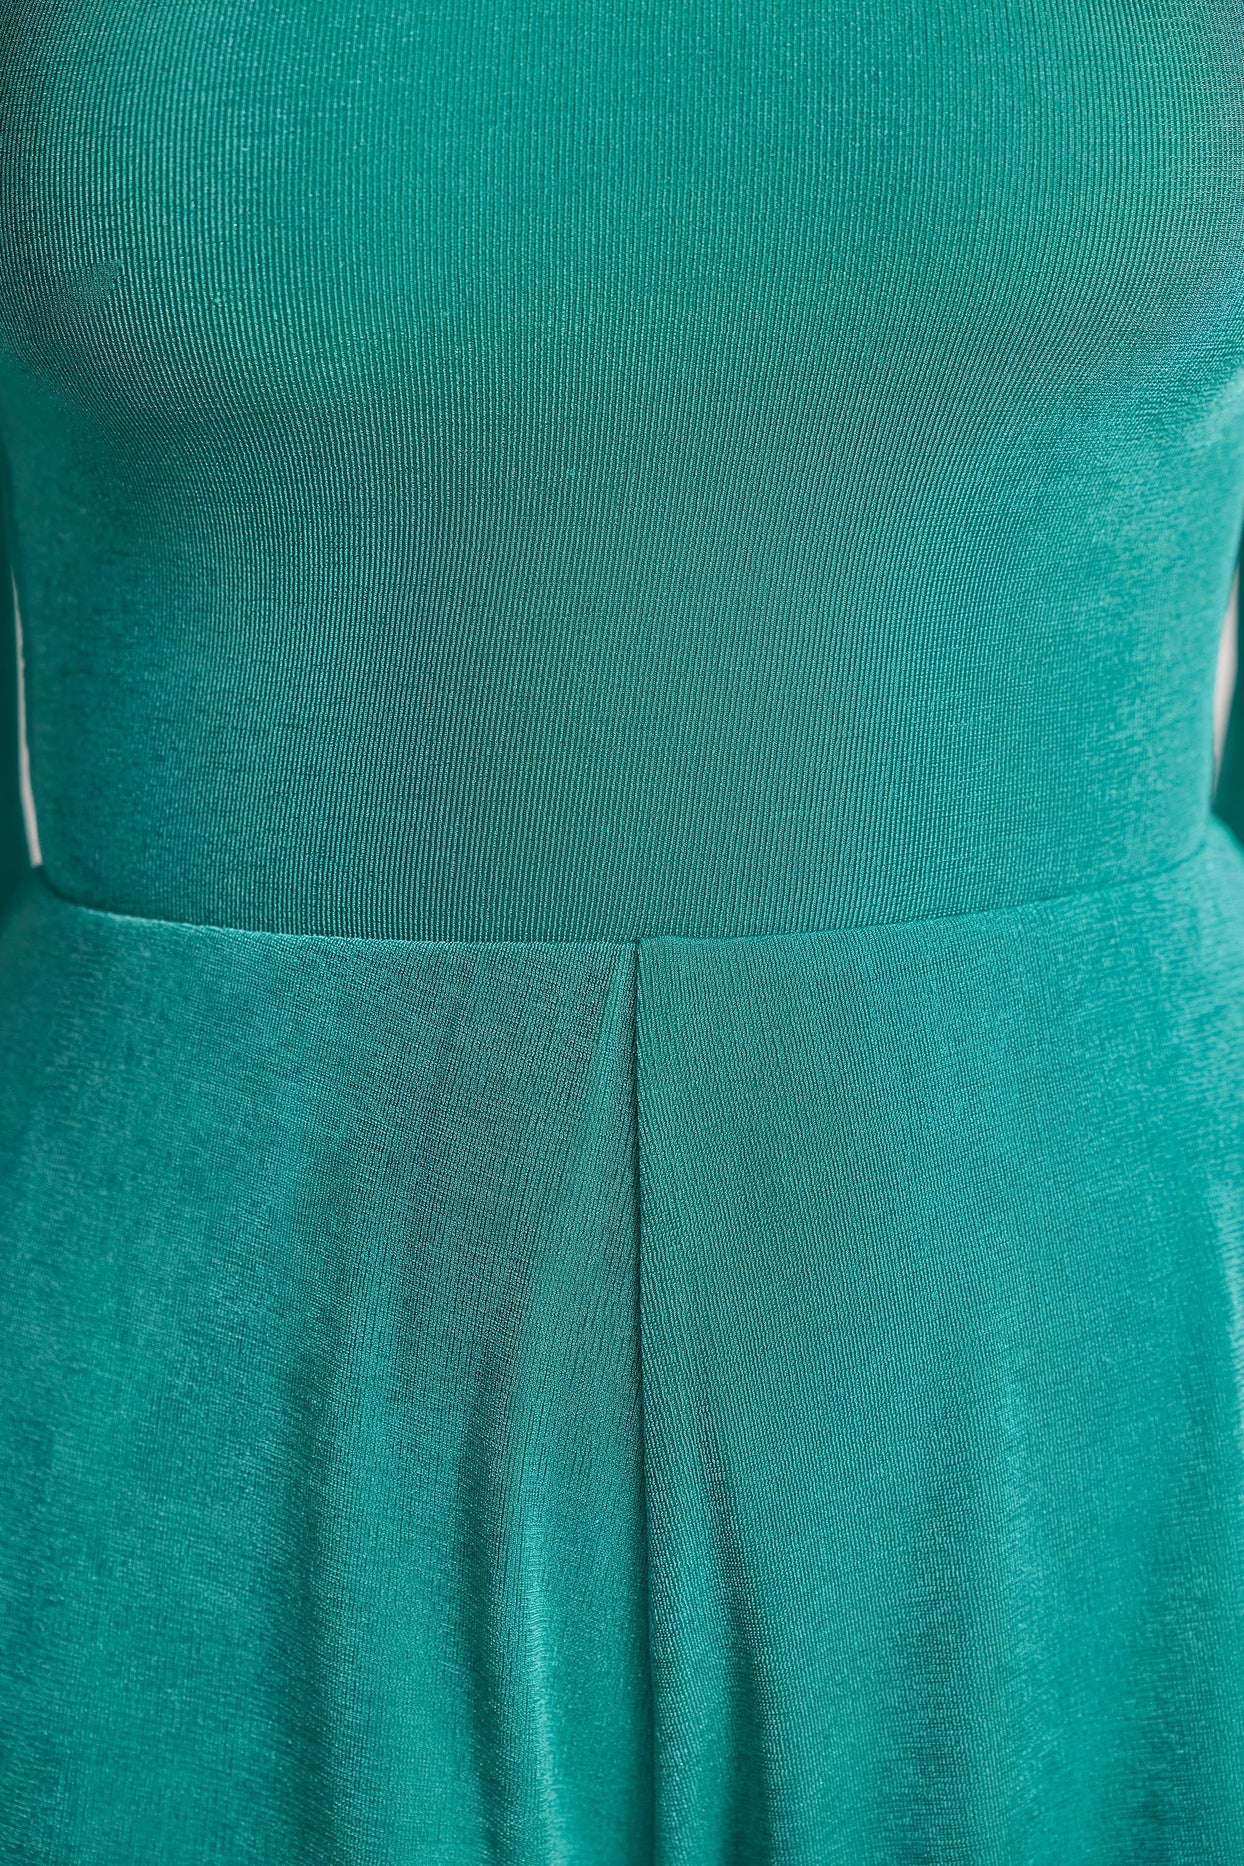 Textured Jersey Asymmetric Cut Out Back Playsuit in Teal